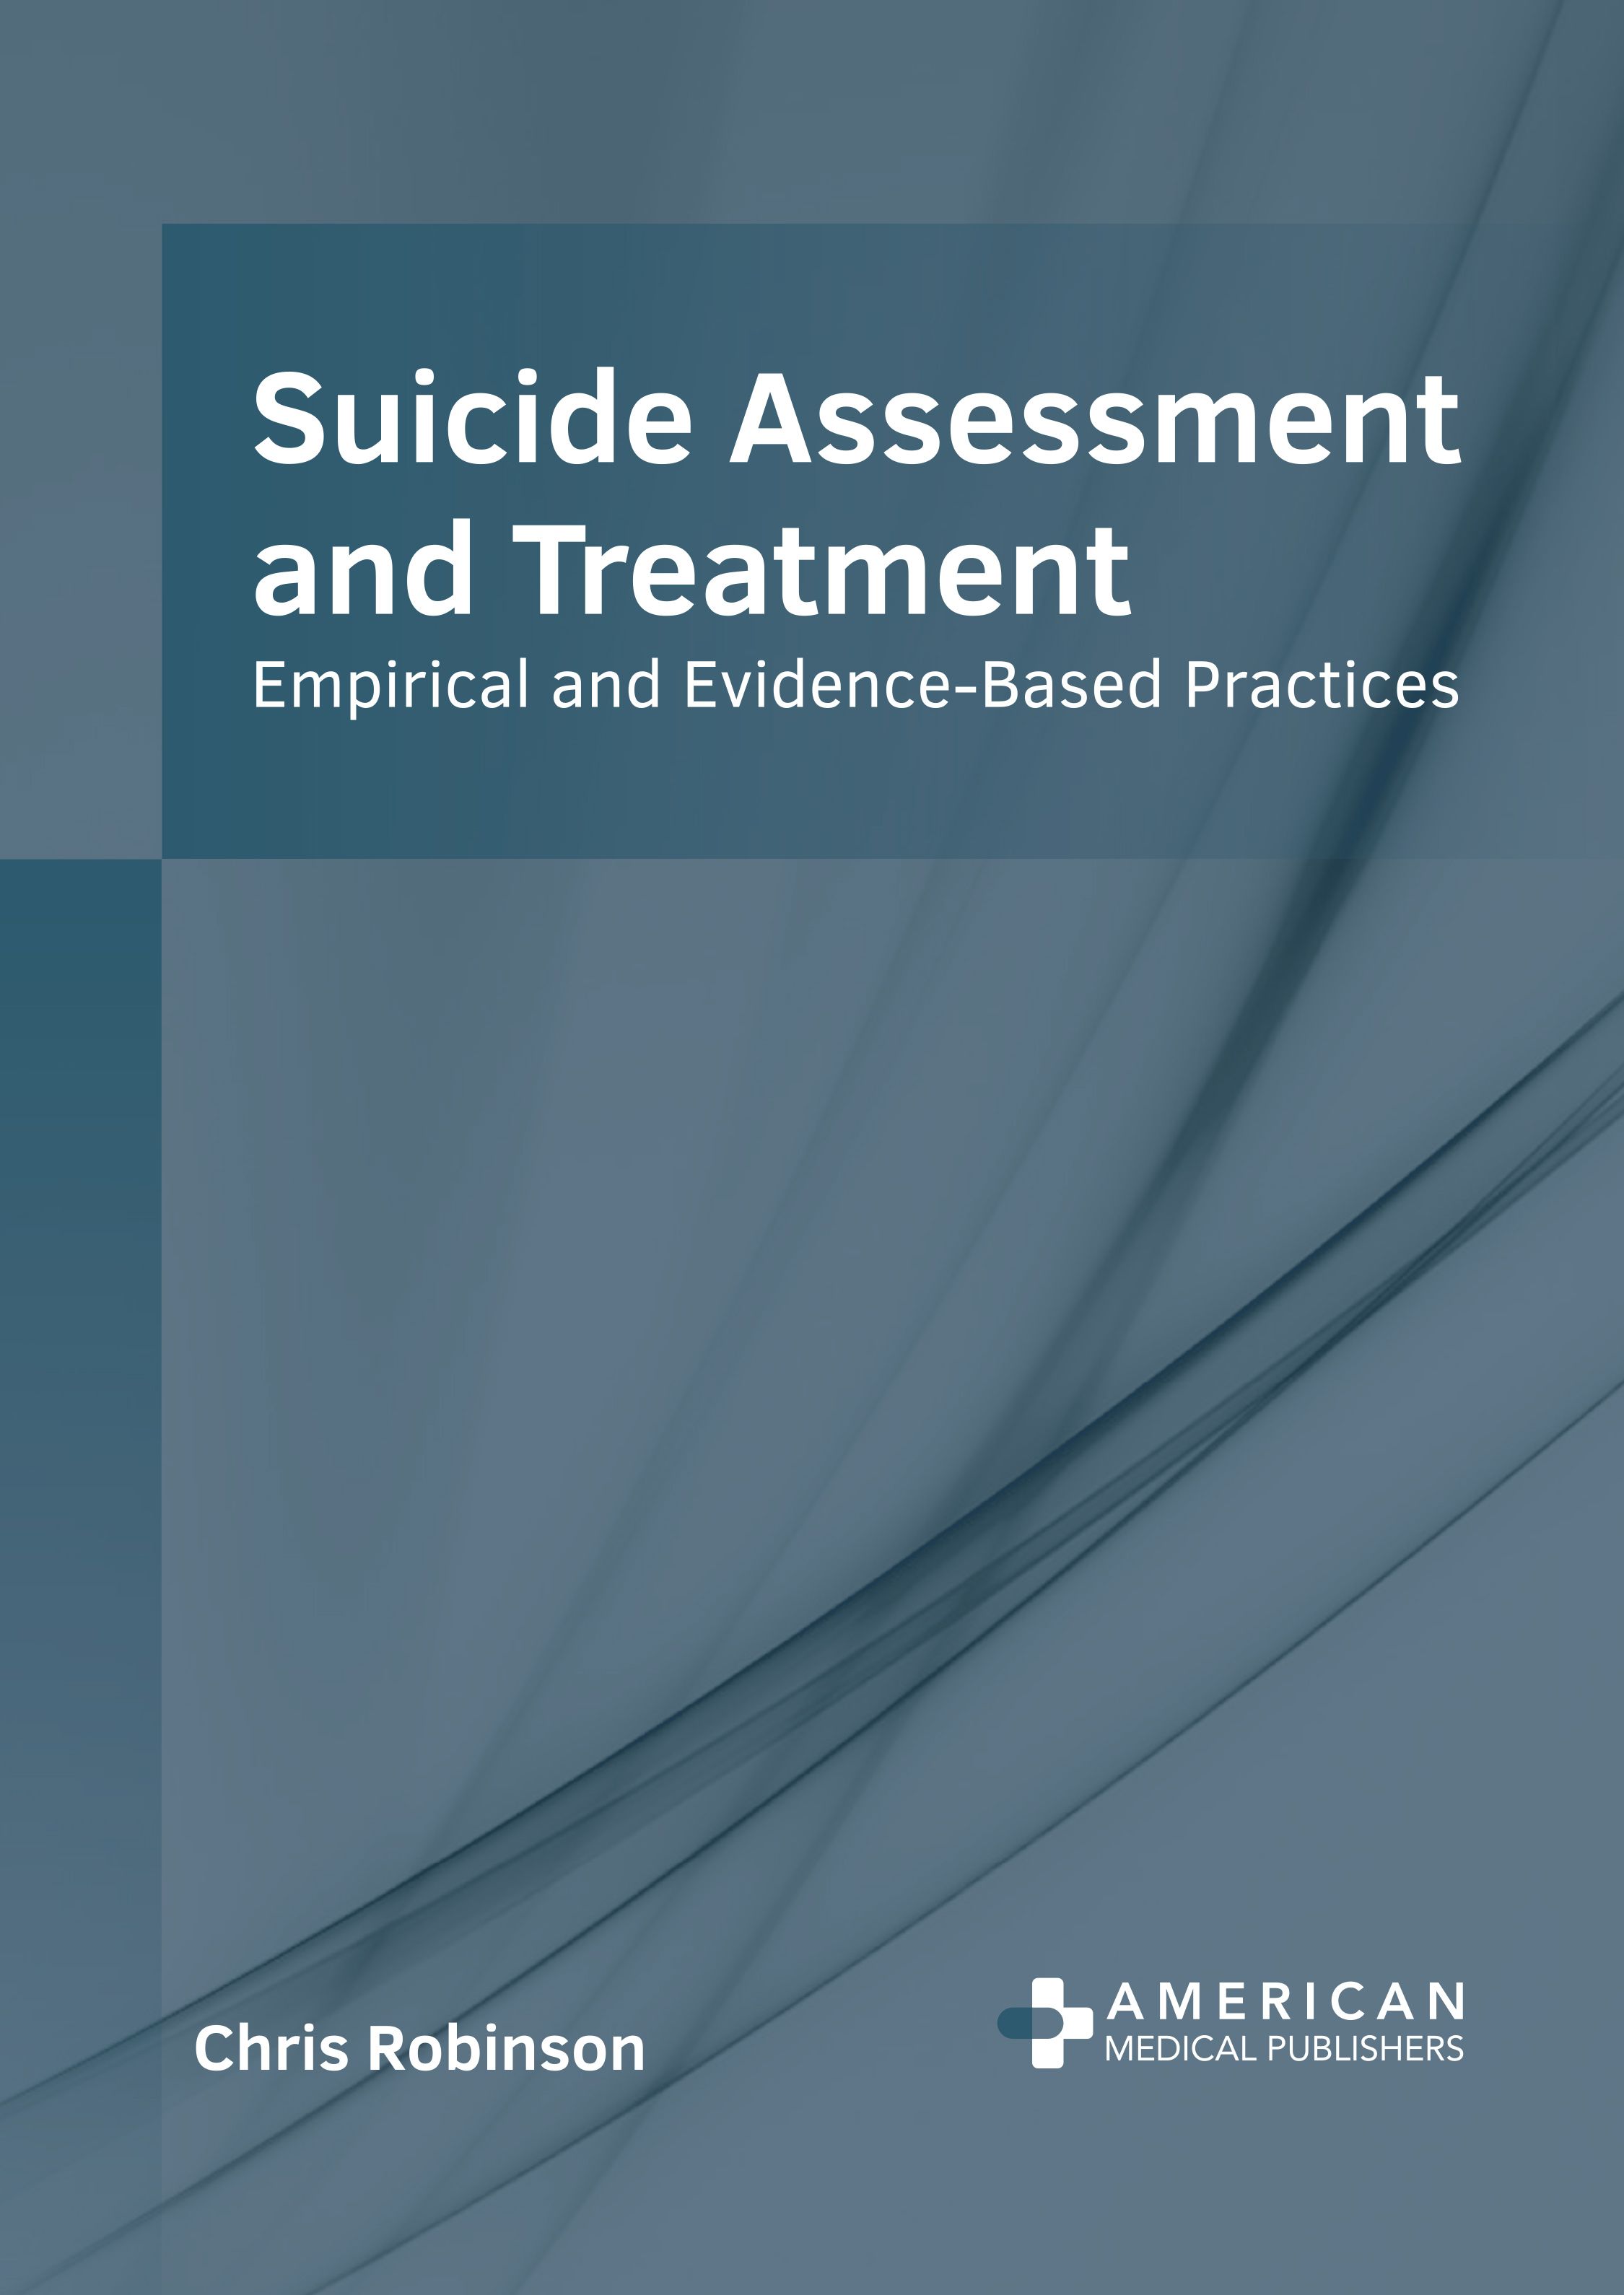 SUICIDE ASSESSMENT AND TREATMENT: EMPIRICAL AND EVIDENCE-BASED PRACTICES